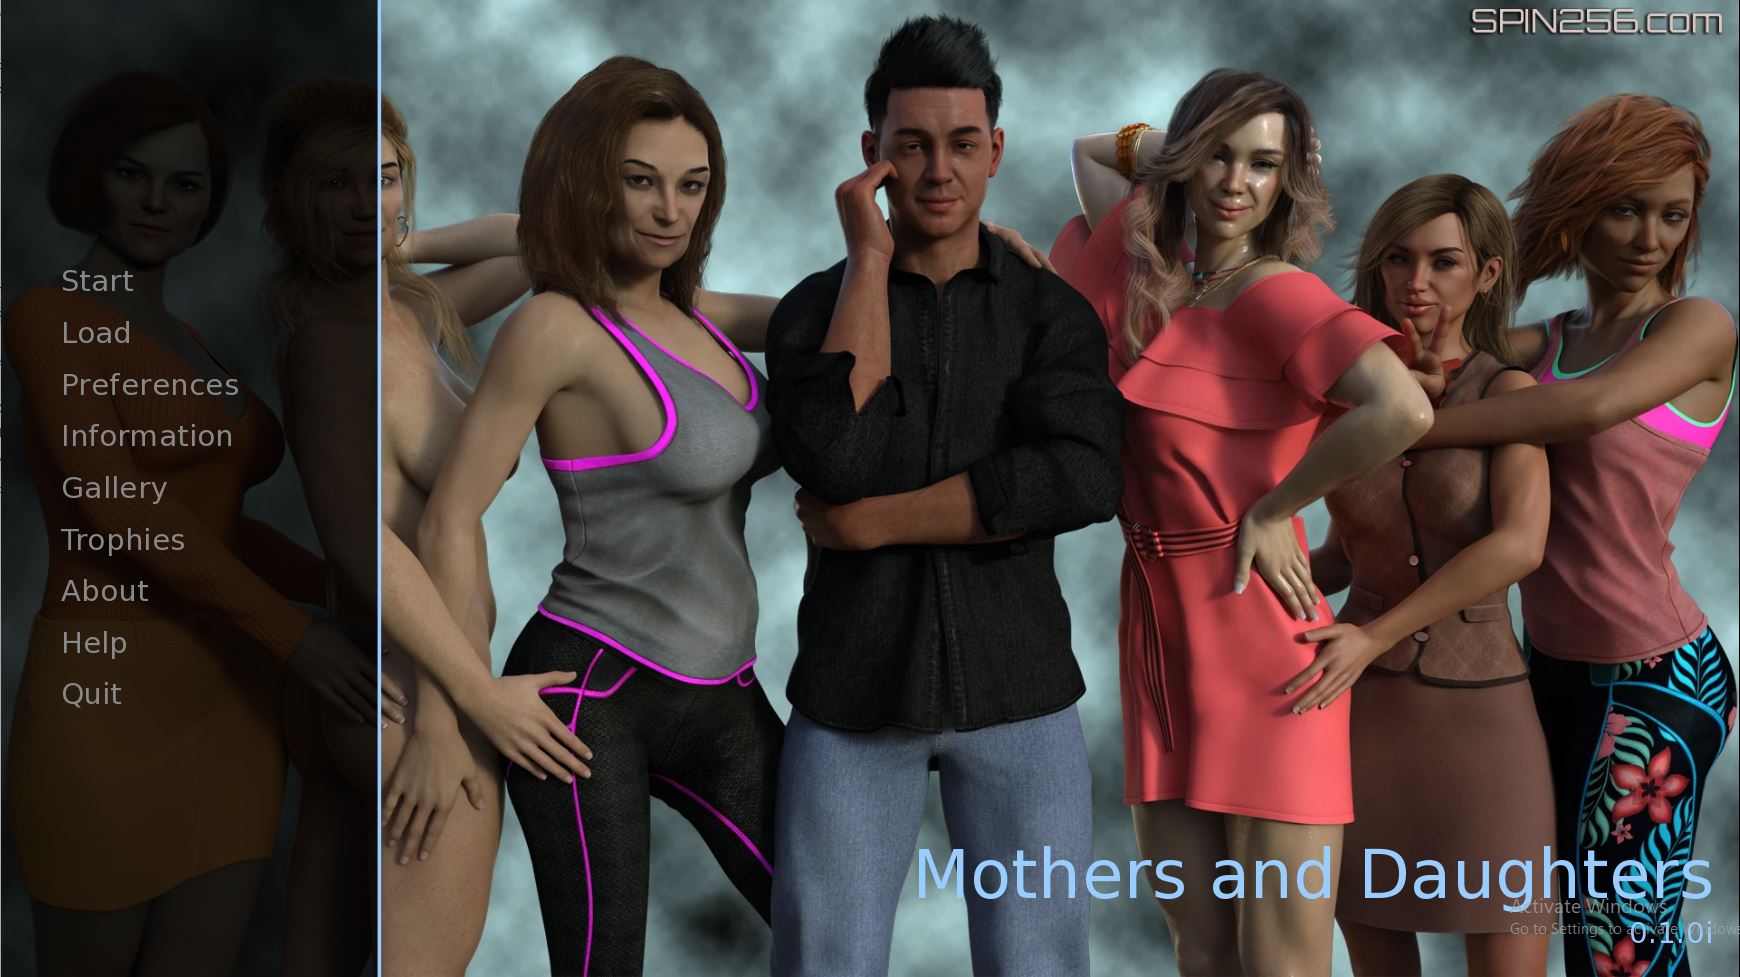 Adult Daughter Porn - Adultgamesworld: Free Porn Games & Sex Games Â» Mothers & Daughters â€“ New  Version 0.5.1.0 [Spin256]